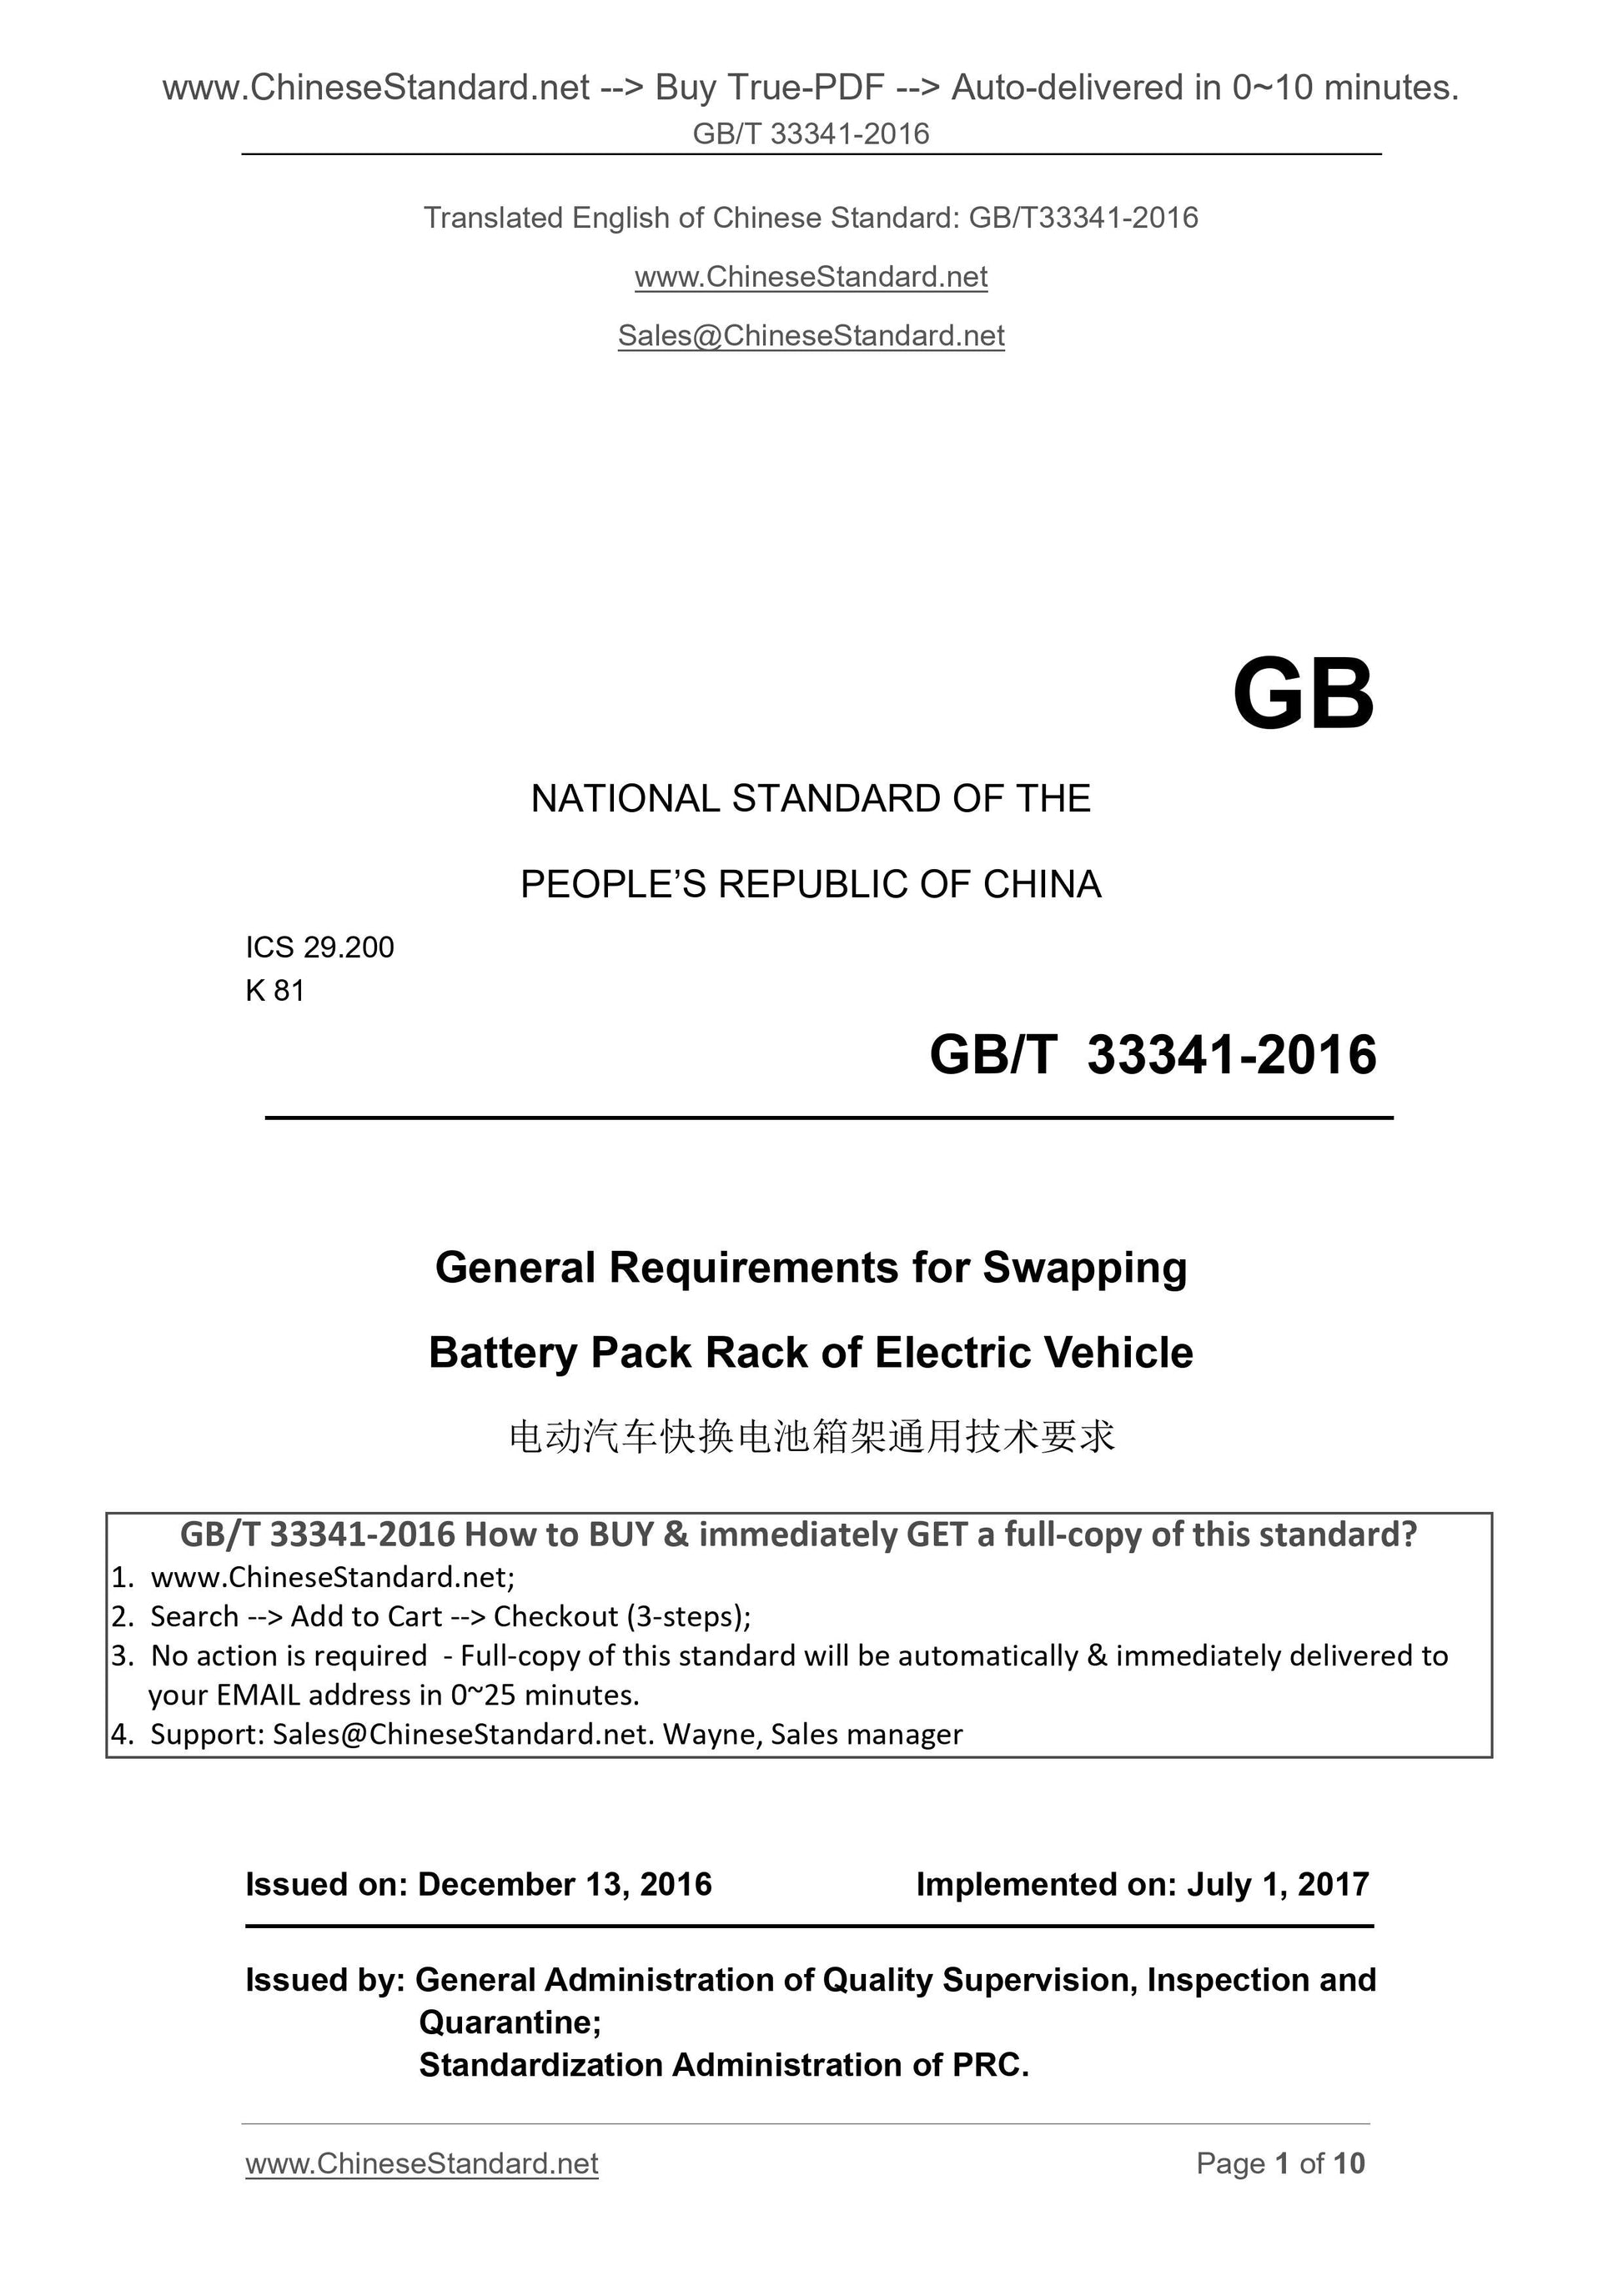 GB/T 33341-2016 Page 1